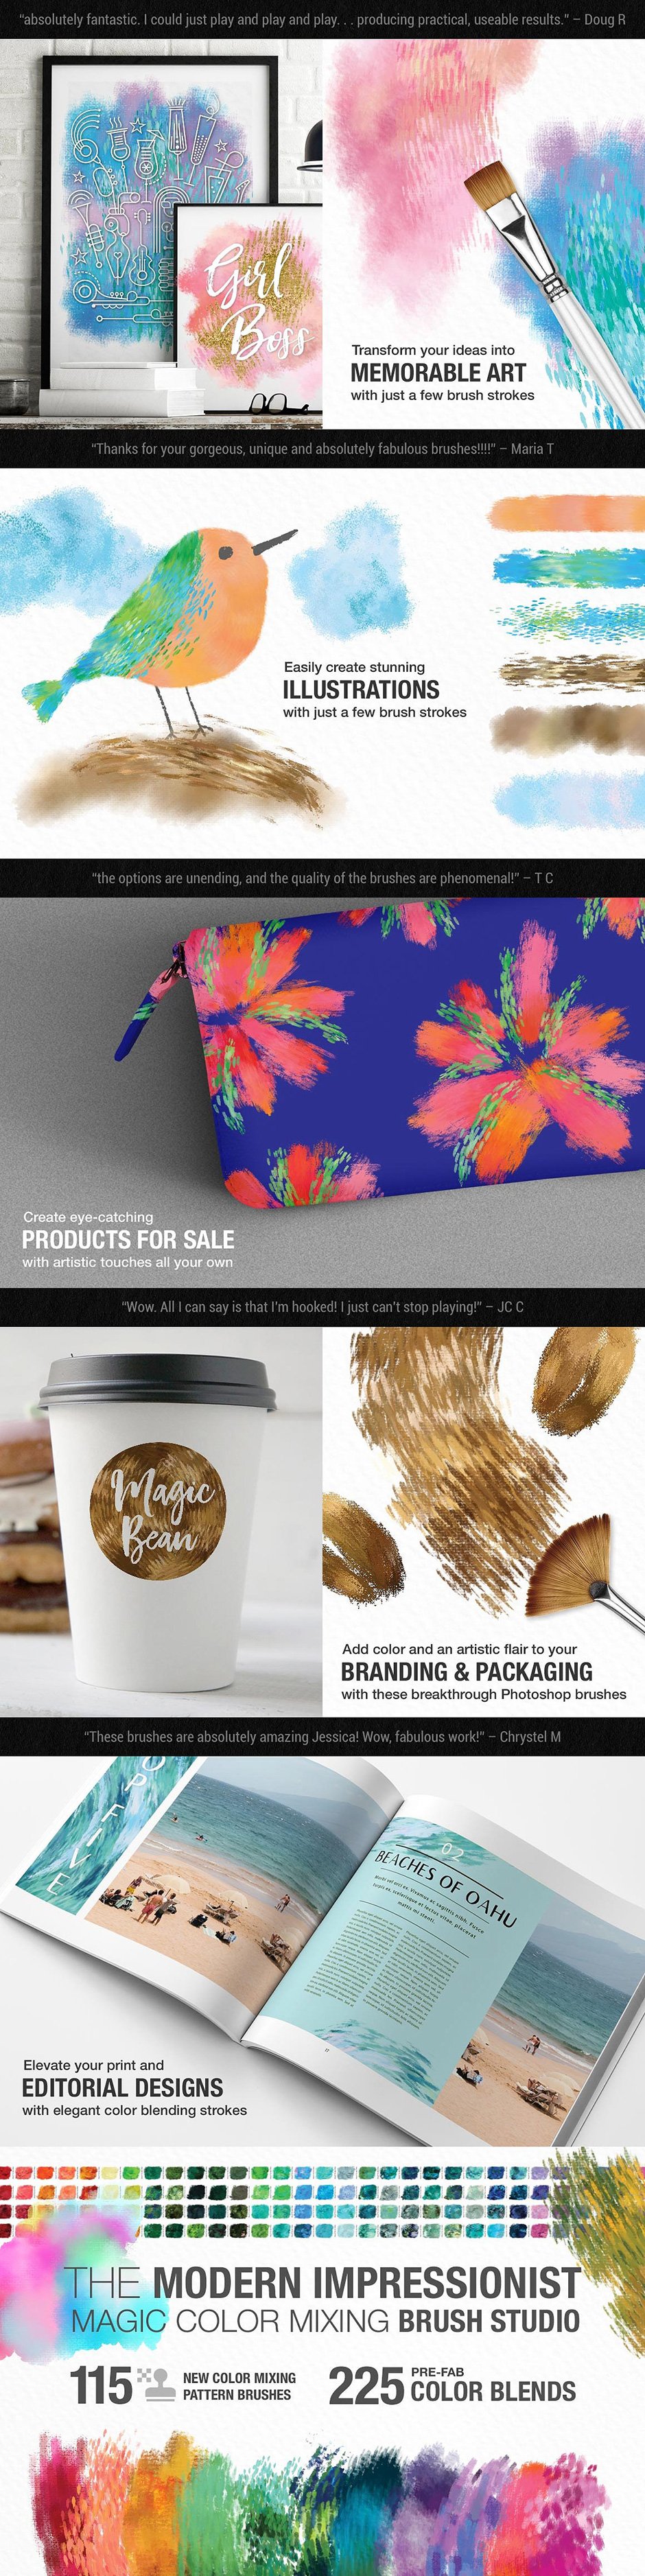 The Extensive Hand-Crafted Design Bundle